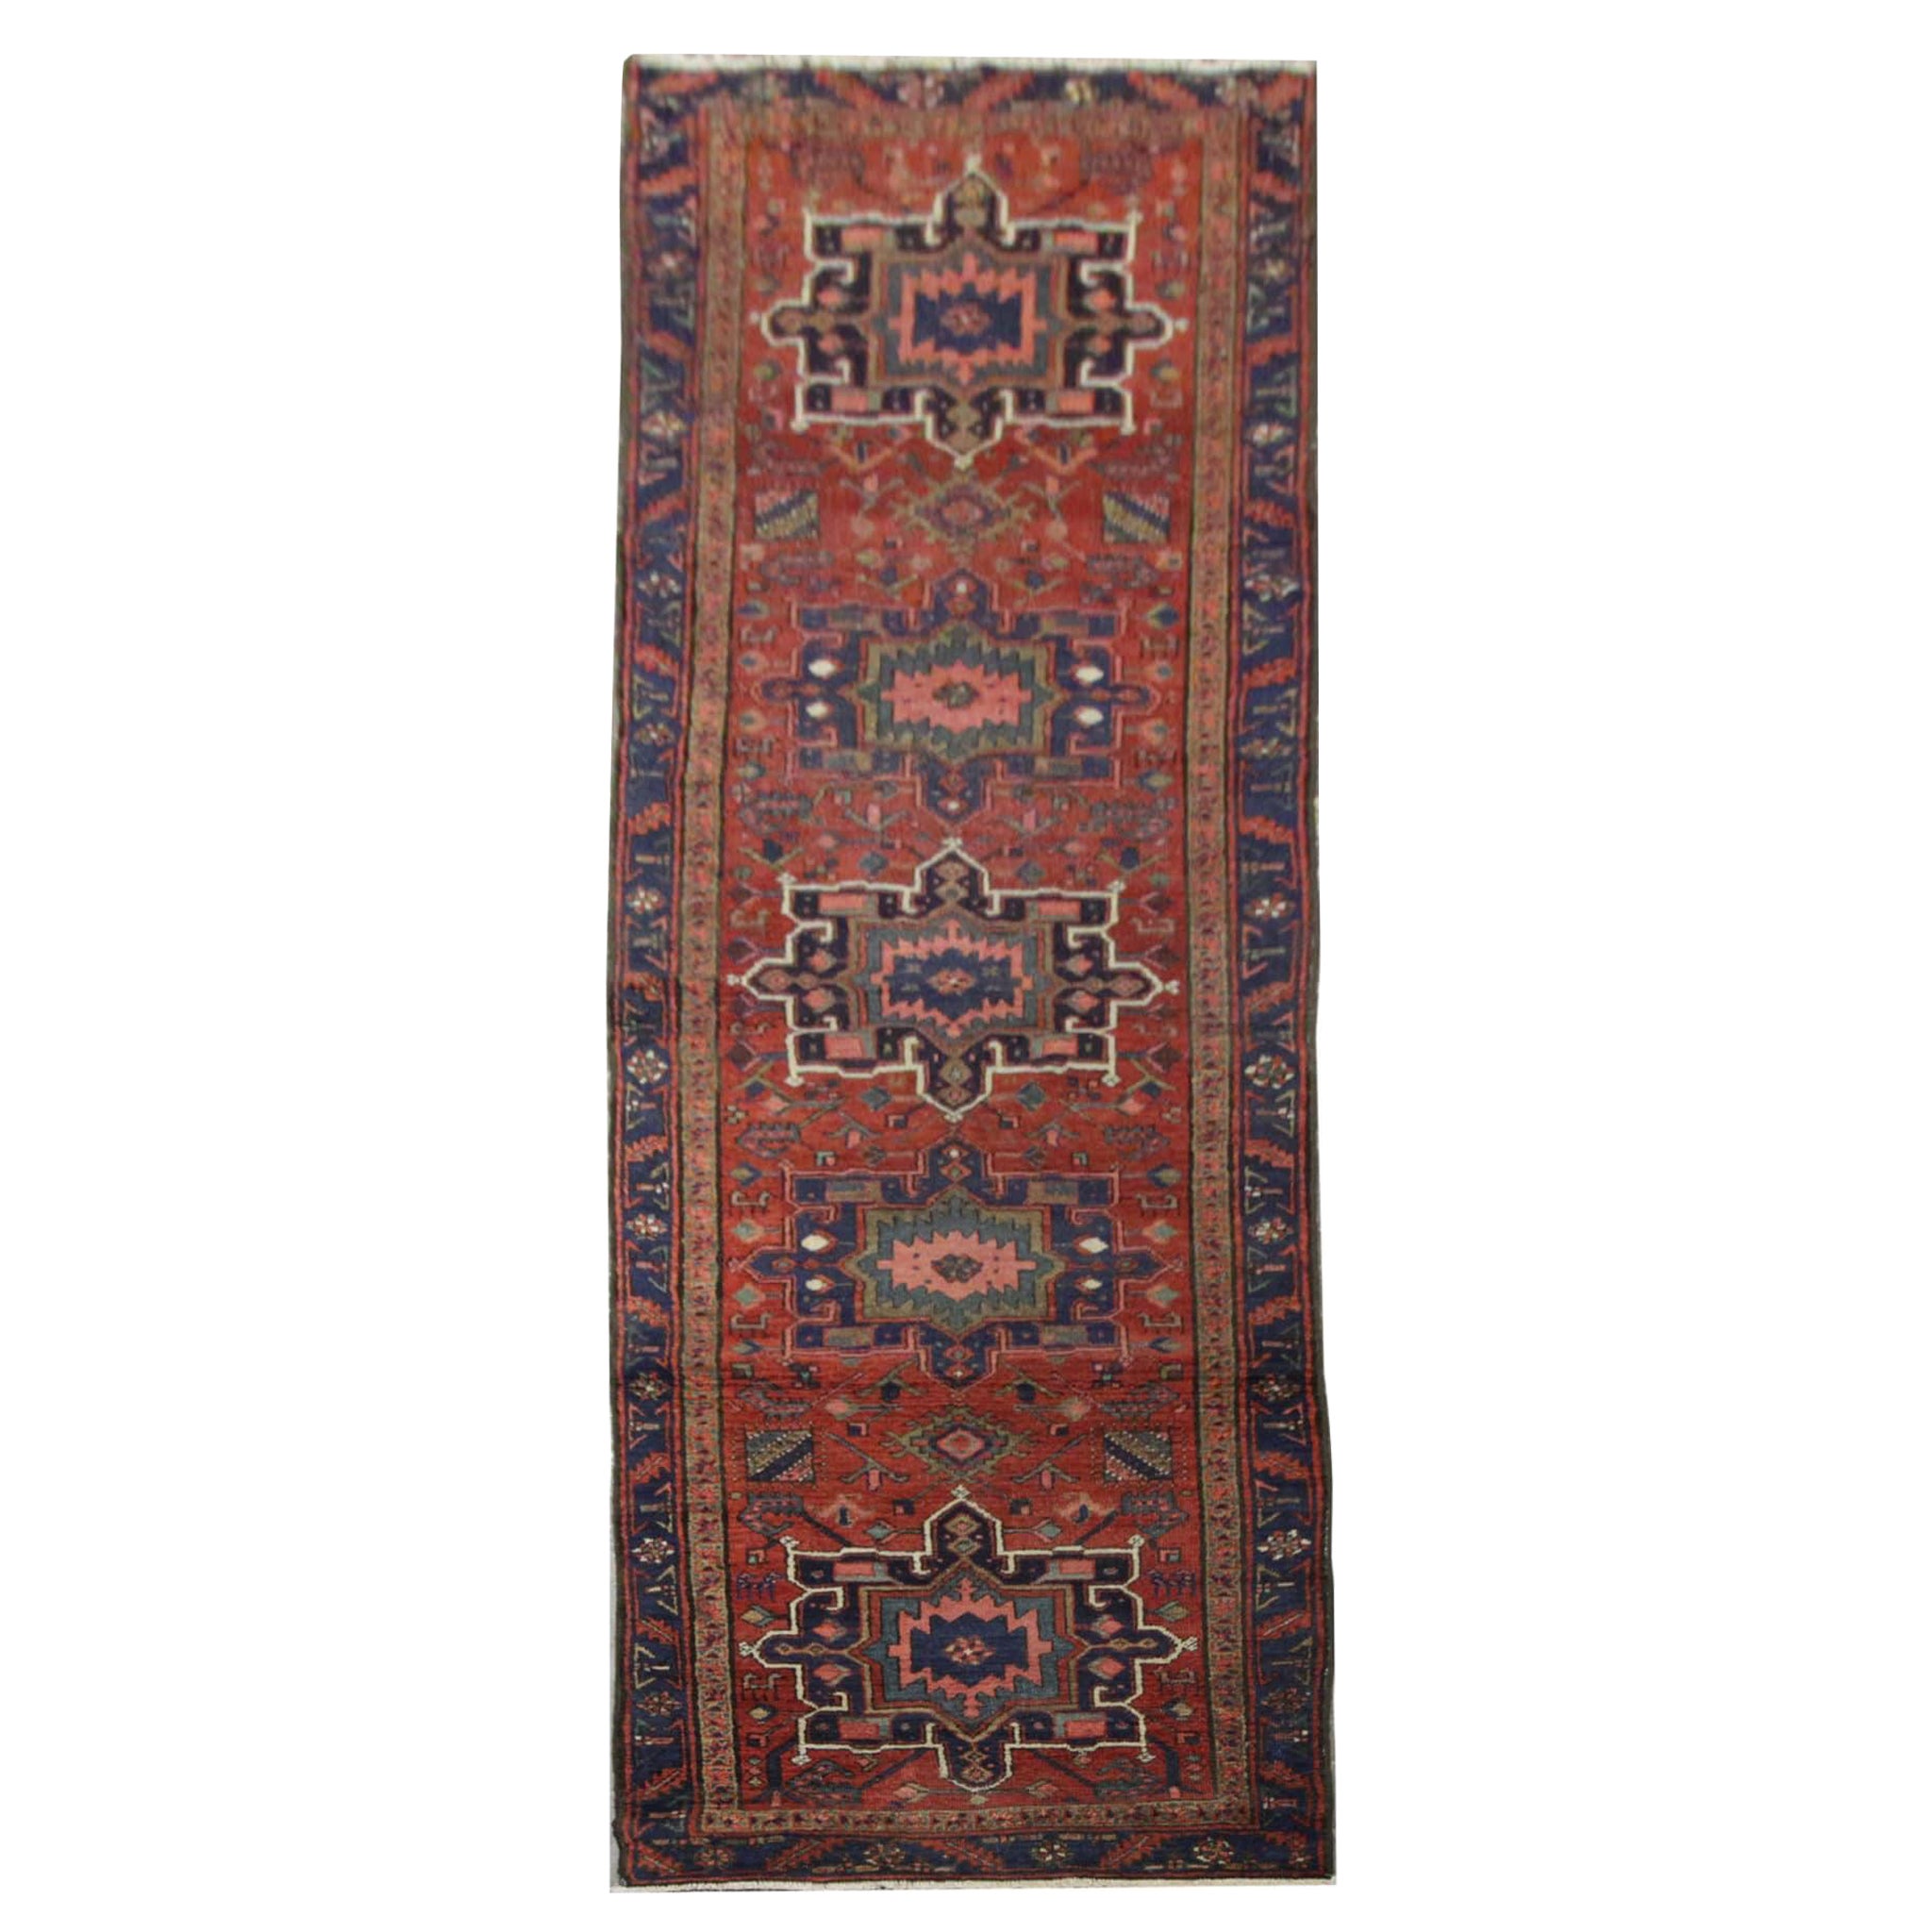 Early 1900s Turkish Rugs